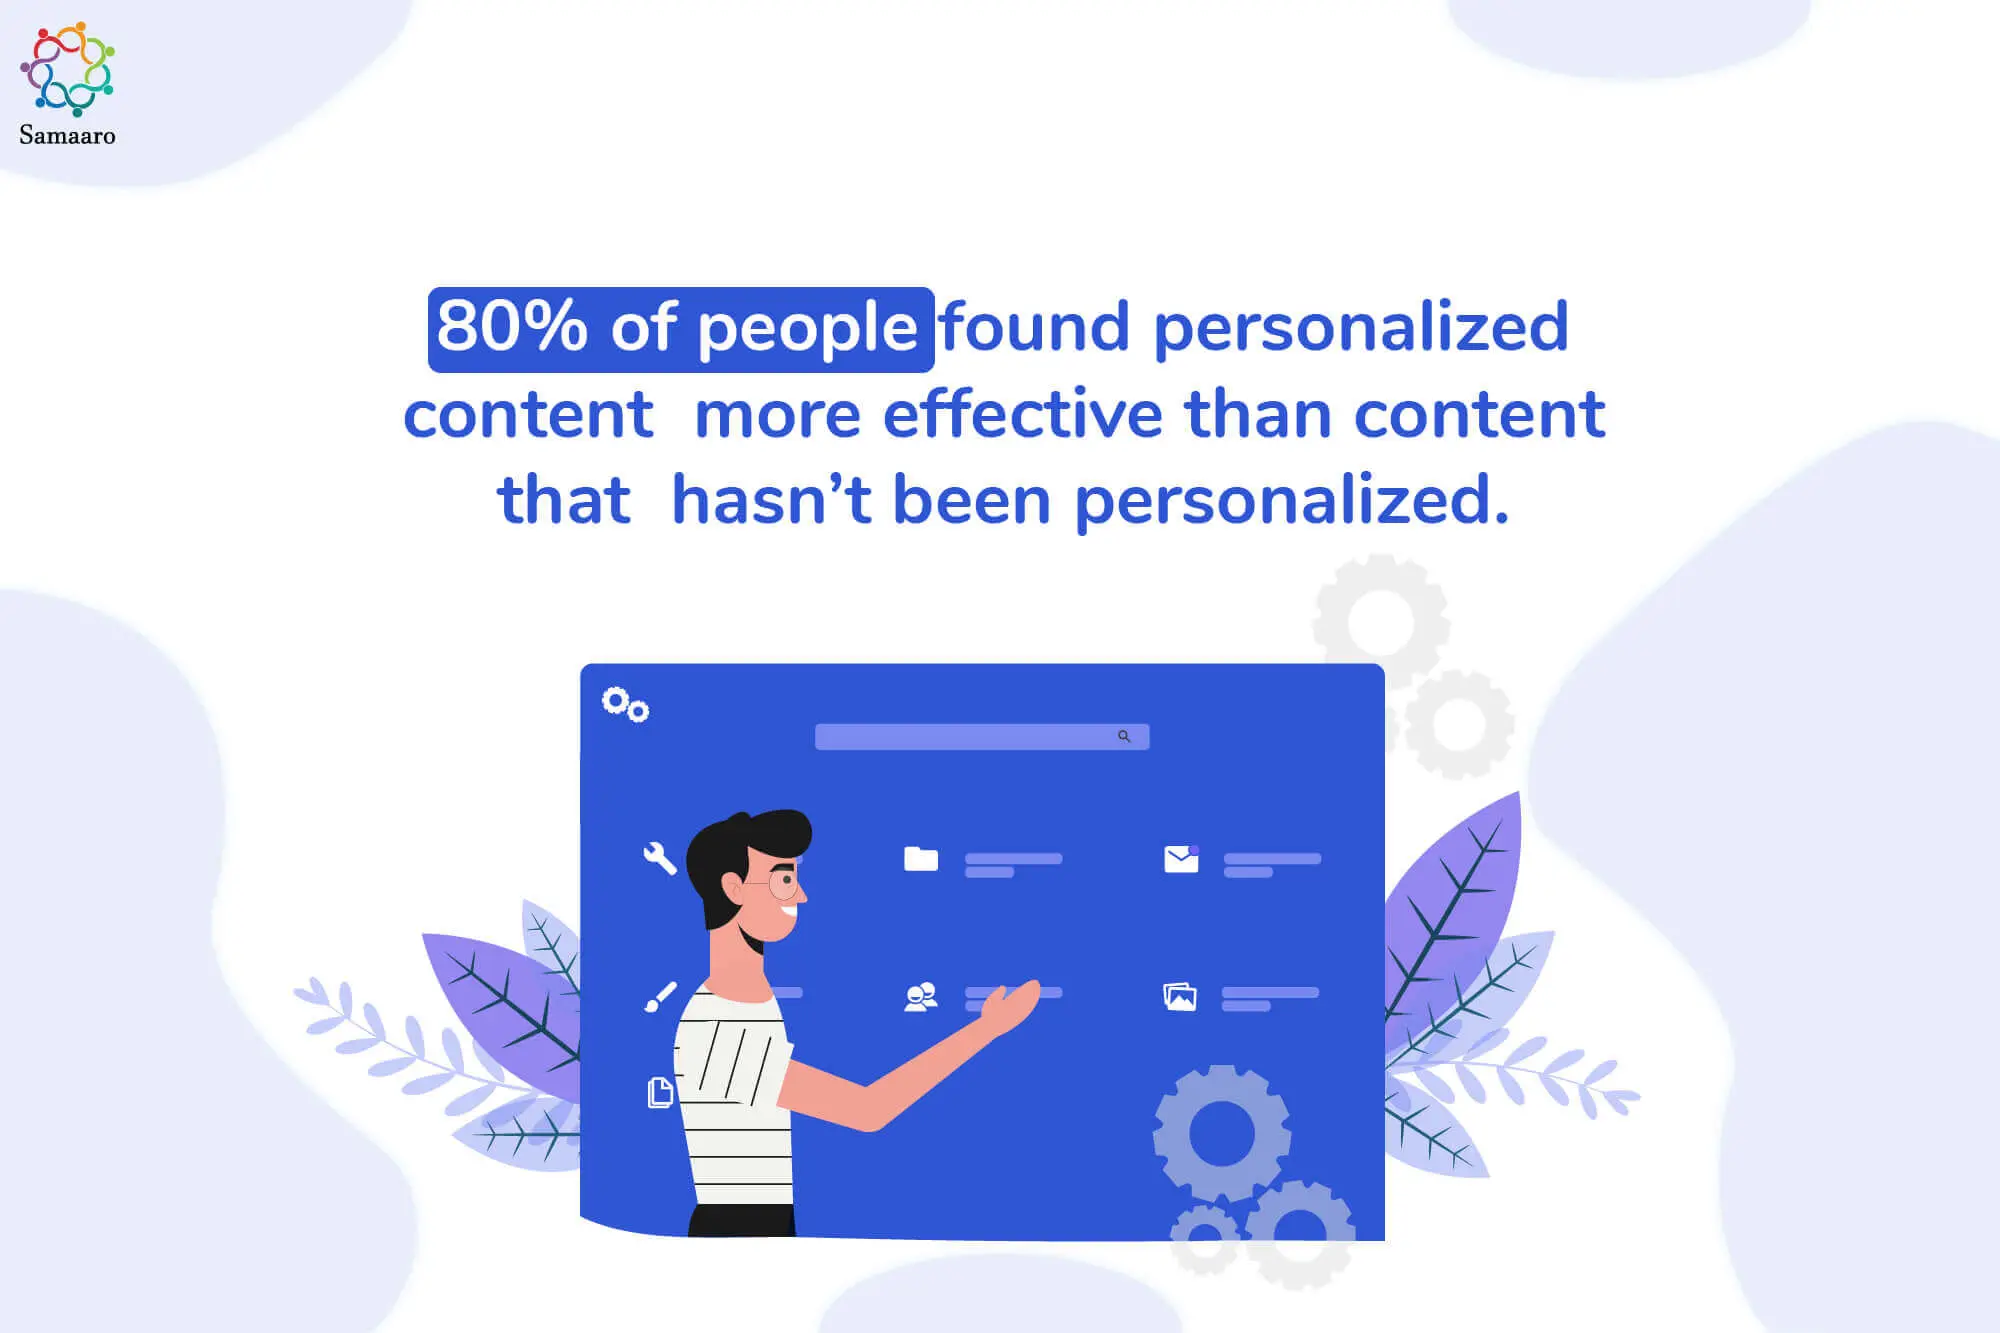 80% of study’s participants found personalized content more effective